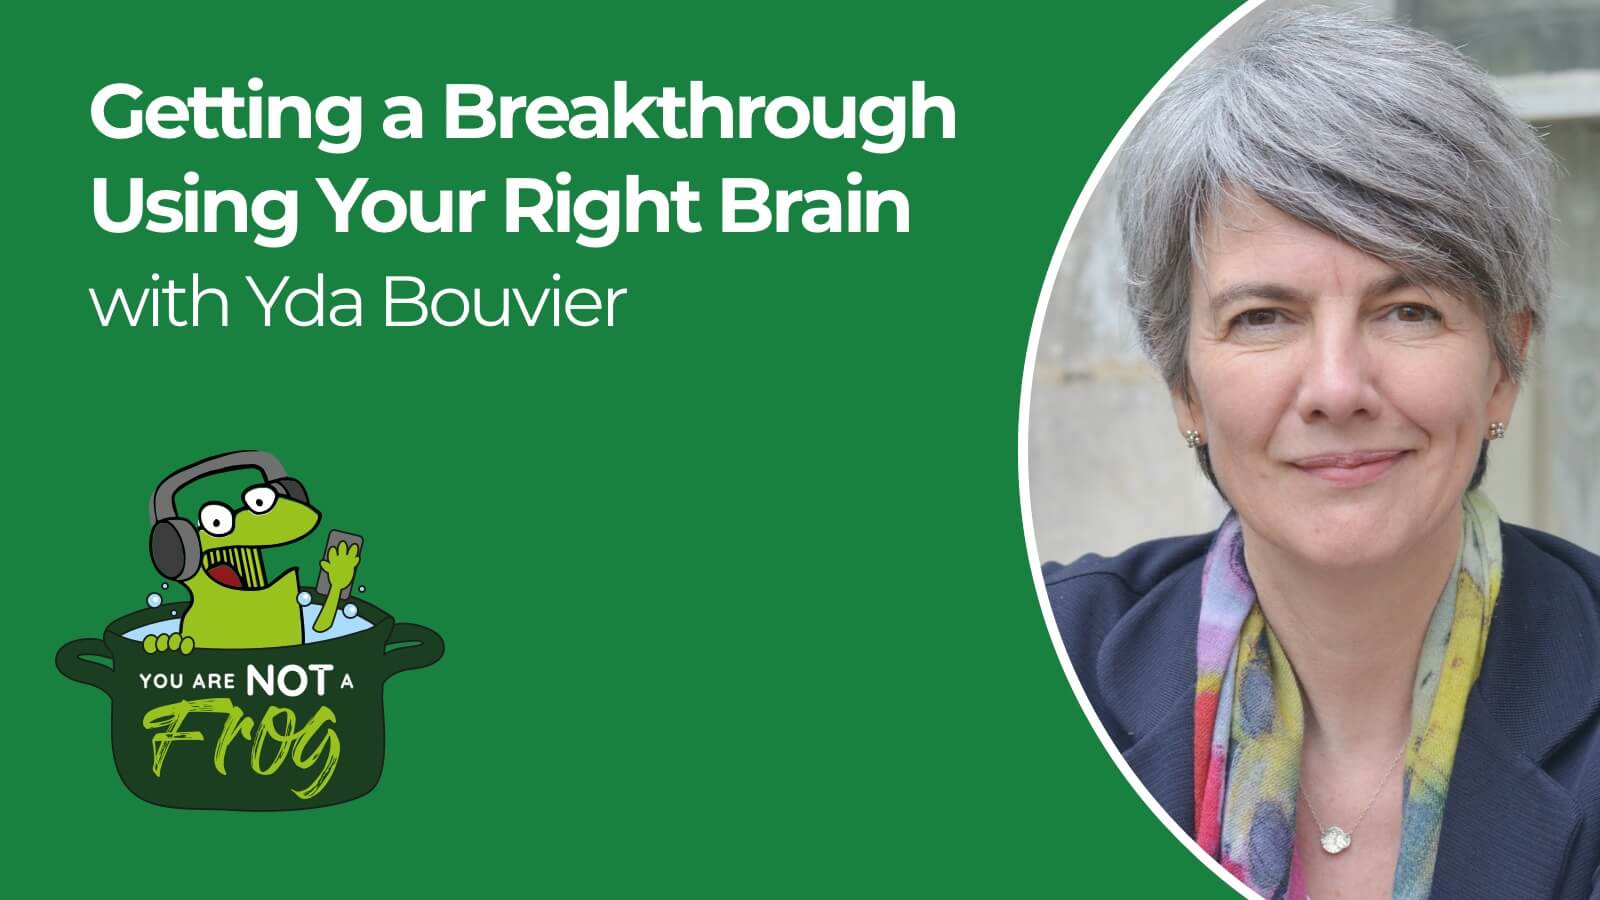 Getting a Breakthrough by Using Your Right Brain